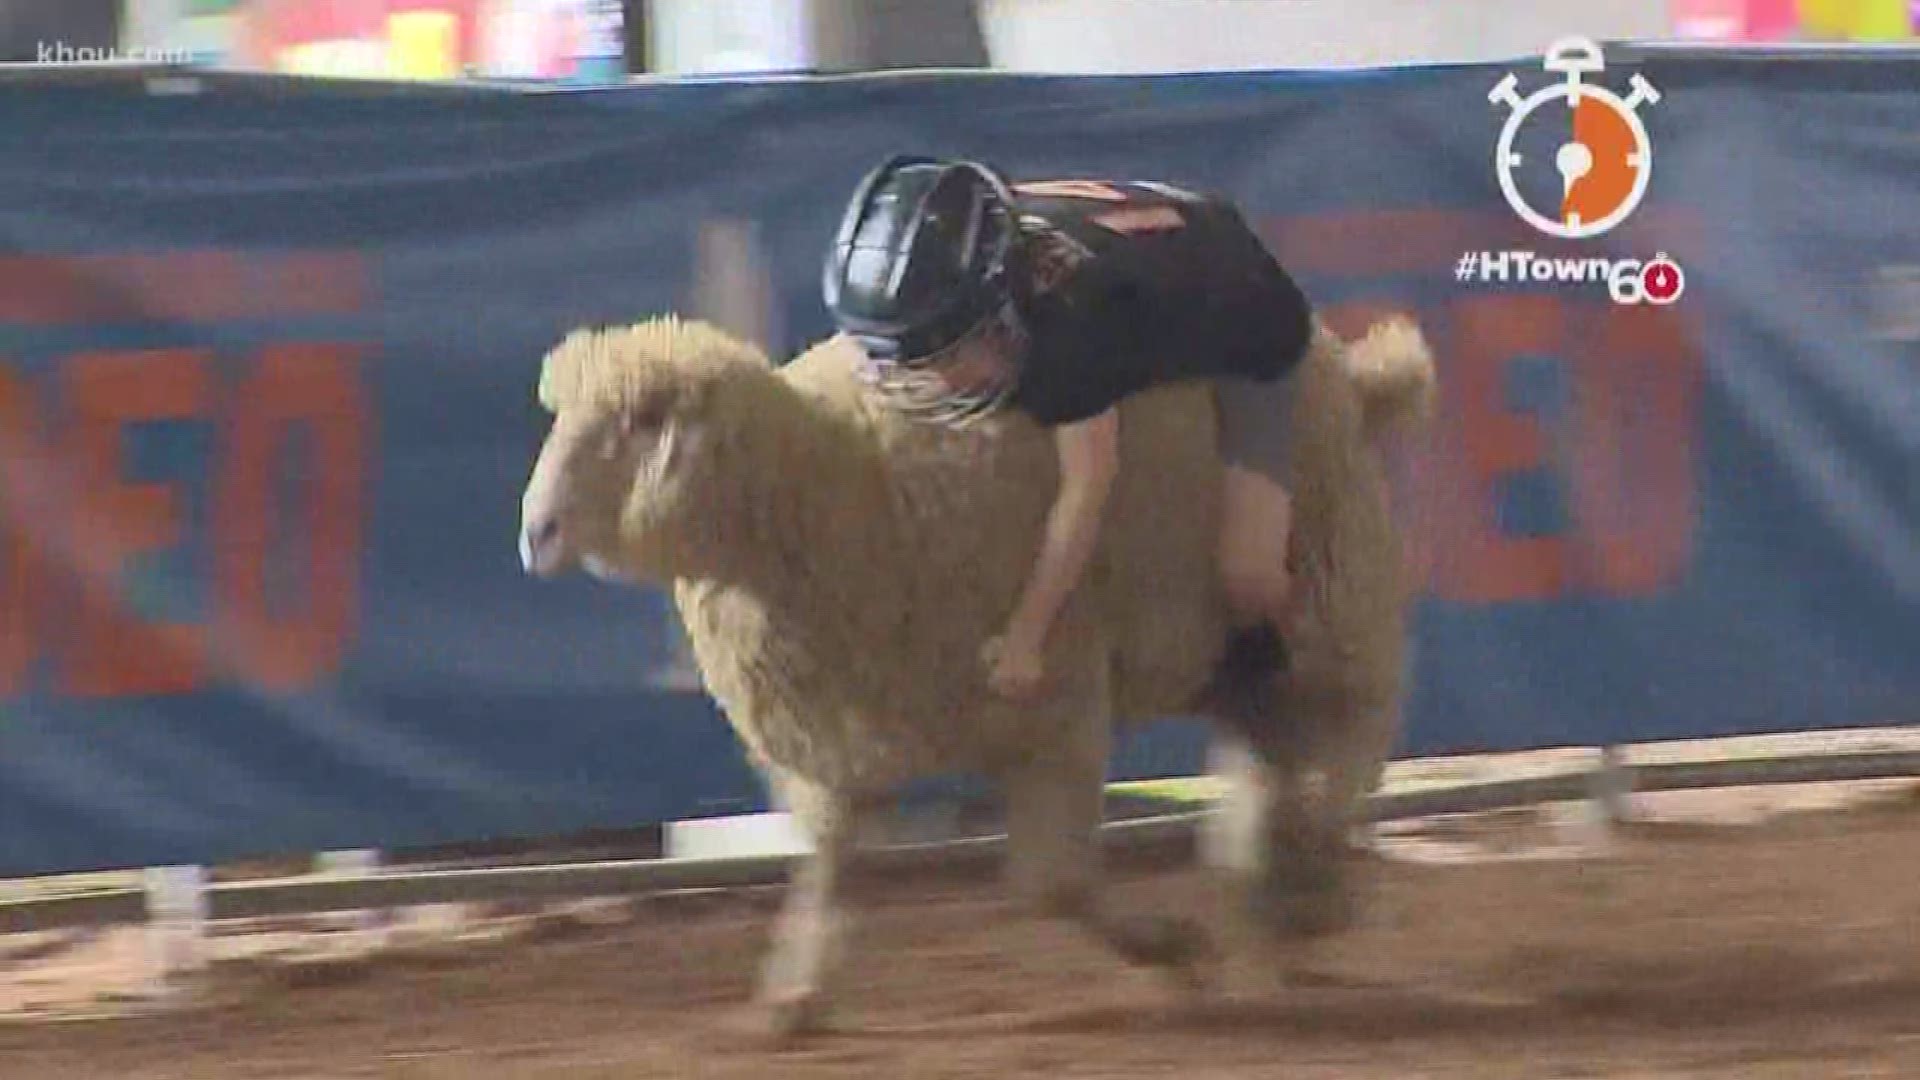 What's your favorite rodeo event? Bull riding? Calf scramble? How about mutton bustin?